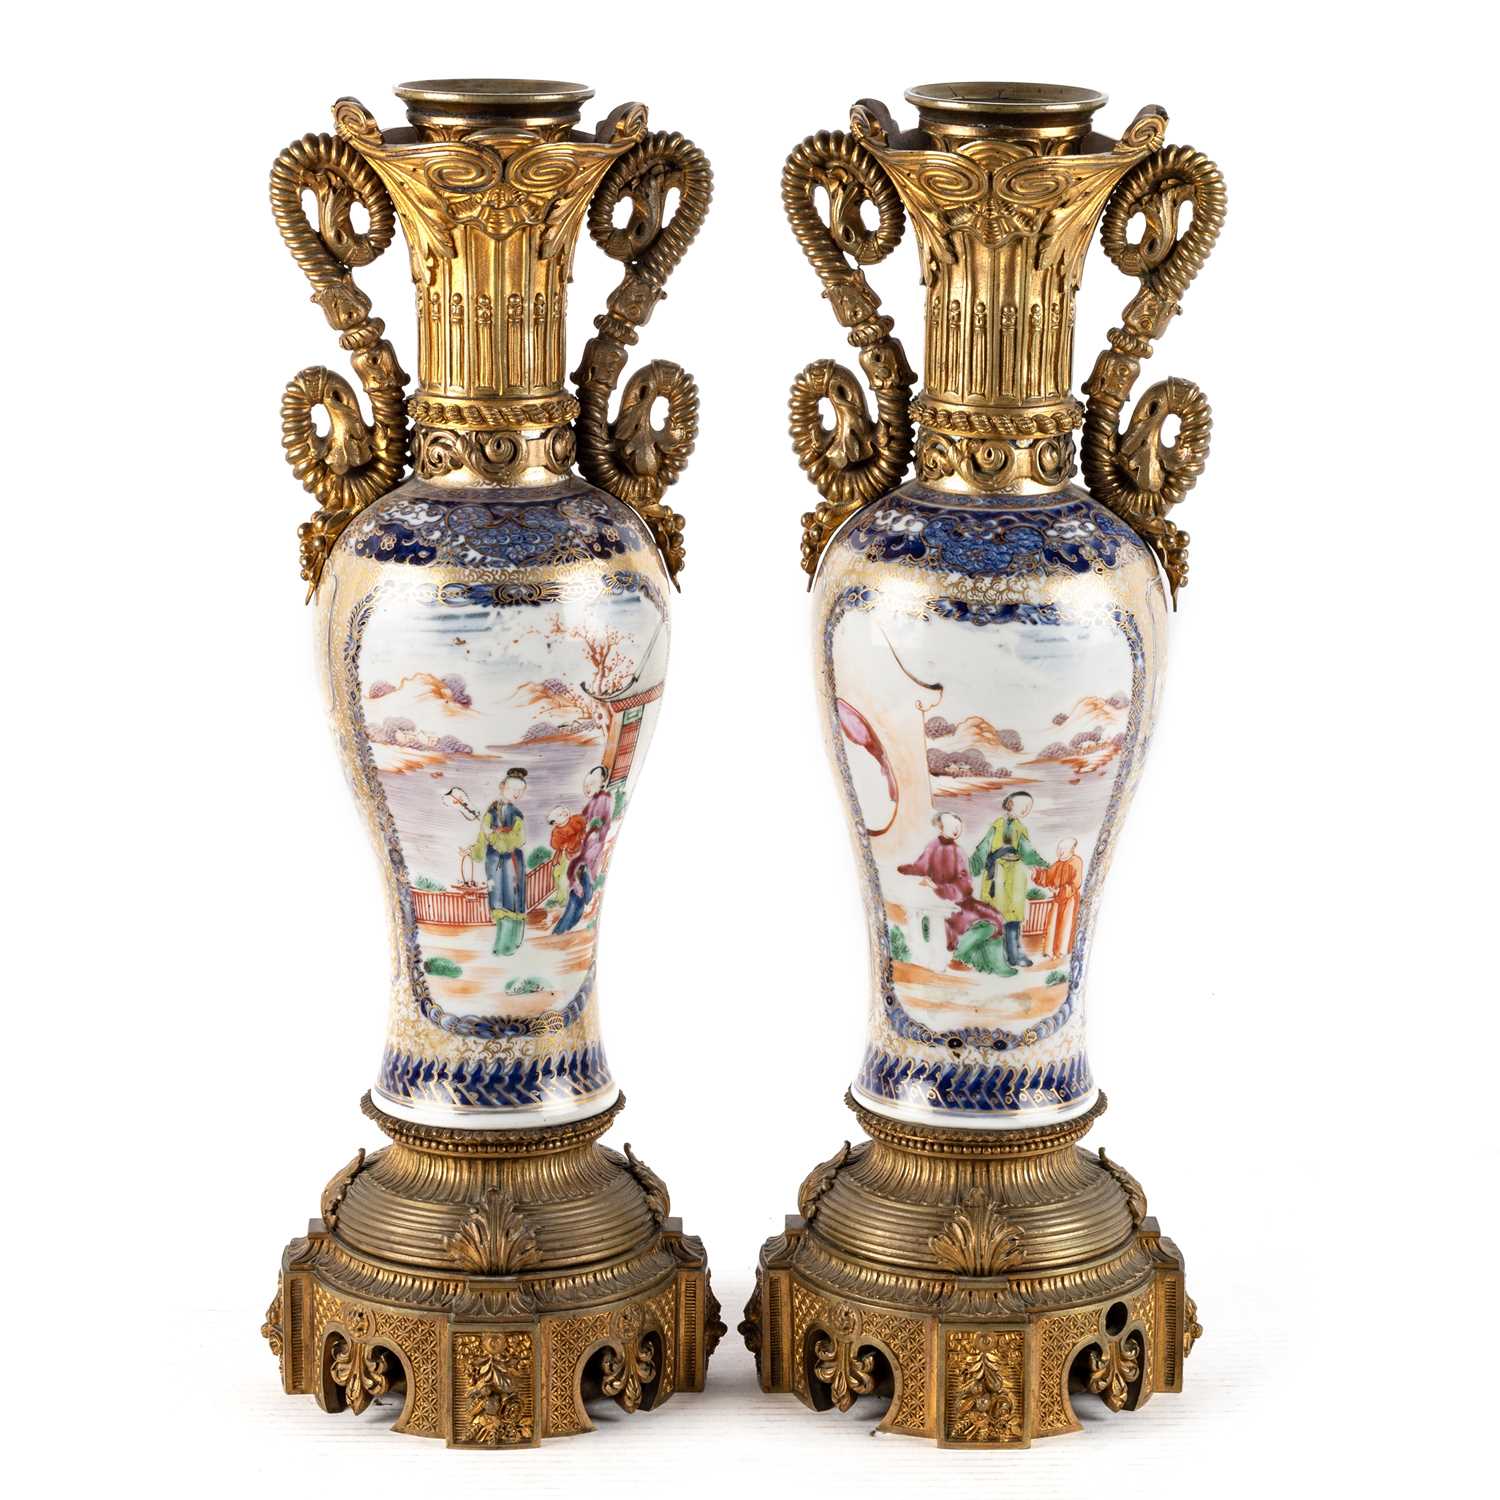 A PAIR OF CHINESE EXPORT MANDARIN PALETTE VASES MOUNTED AS LAMPS, THE VASES CIRCA 1785